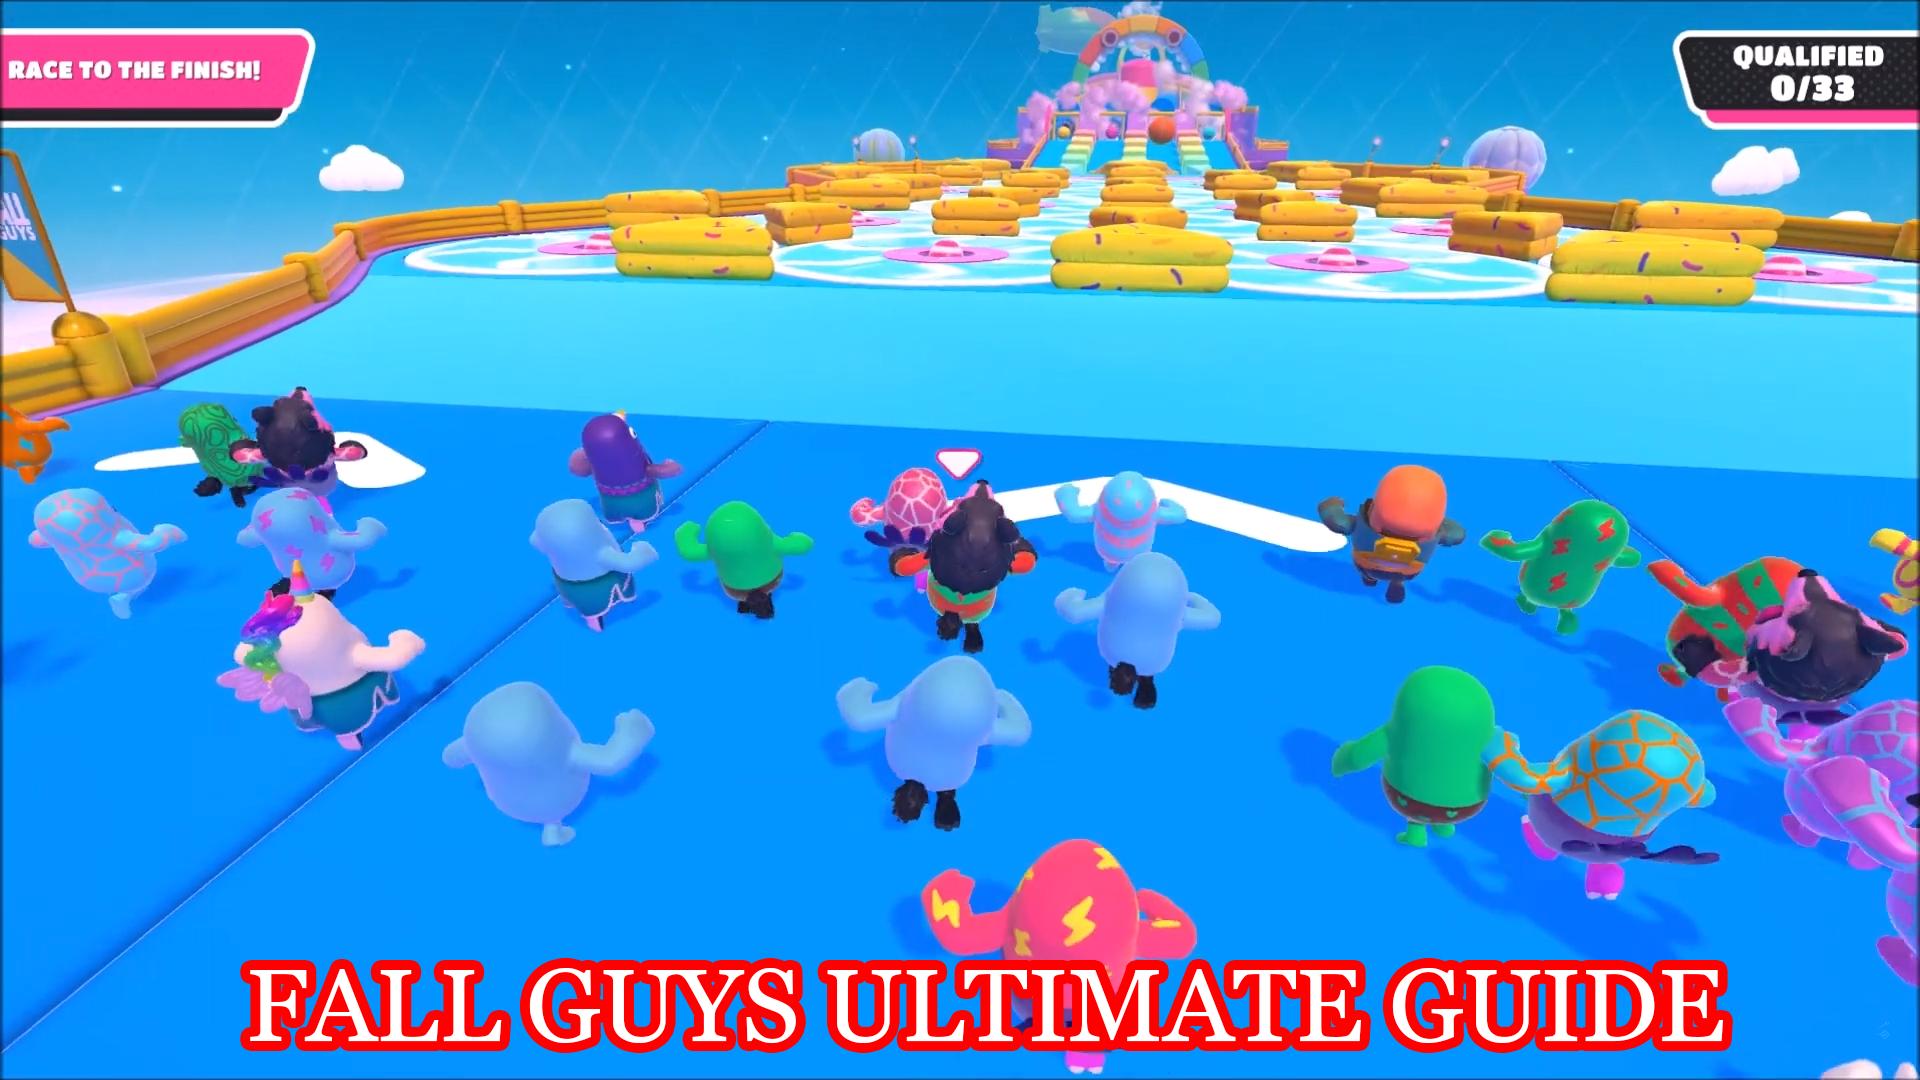 Fall Guys Ultimate Knockout Game Guide 1.0 Screenshot 2